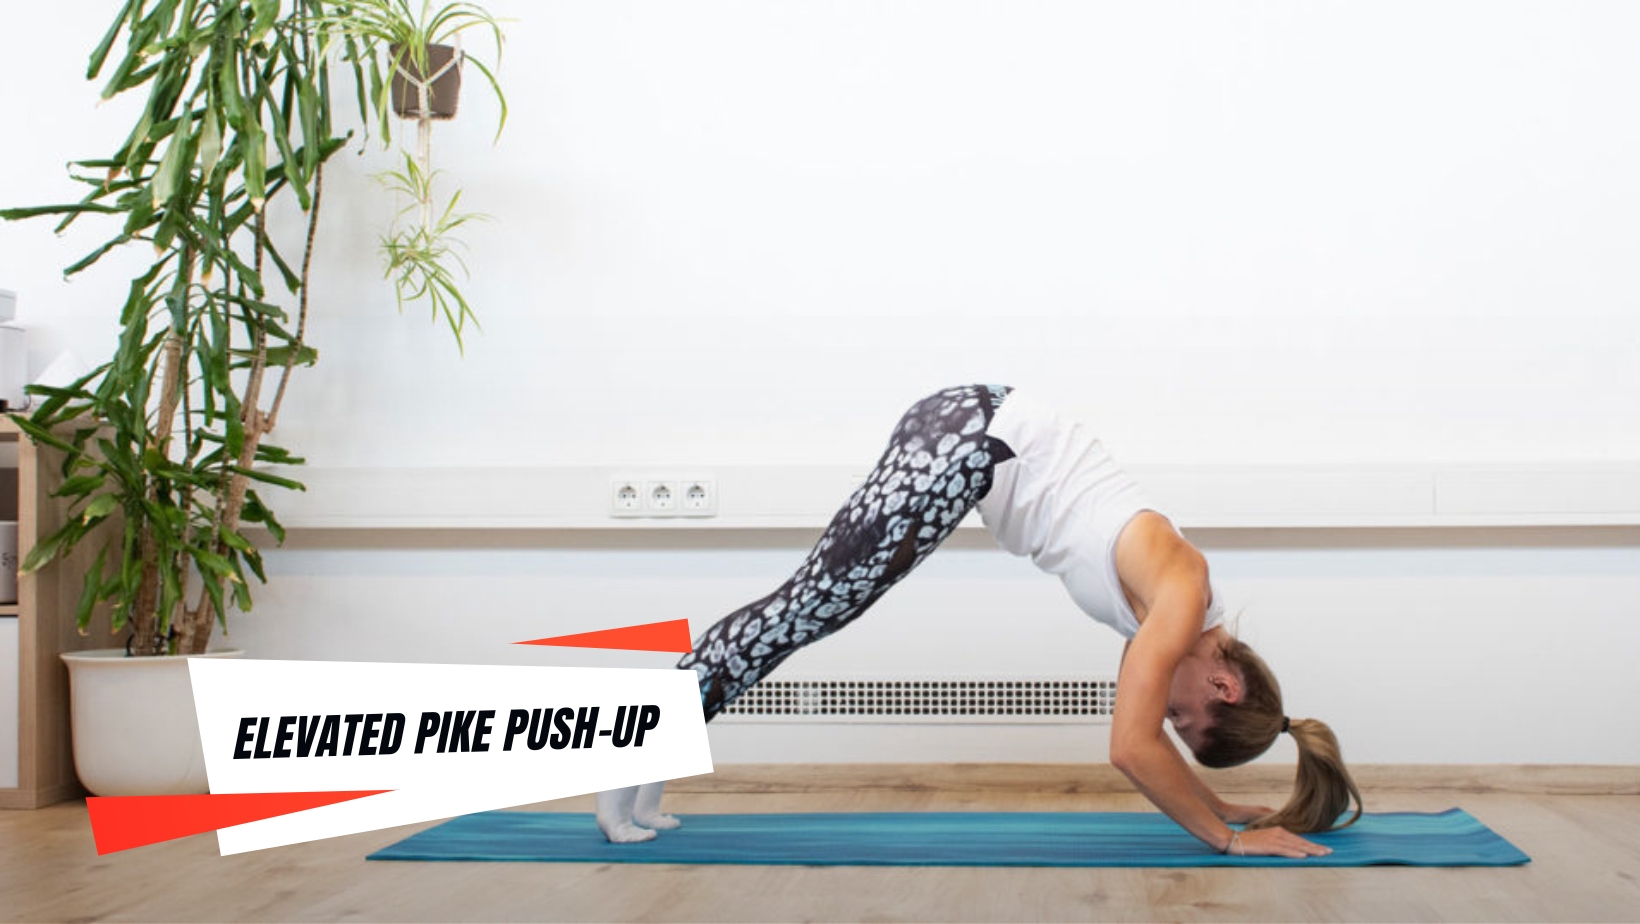 Elevated Pike Push-Up